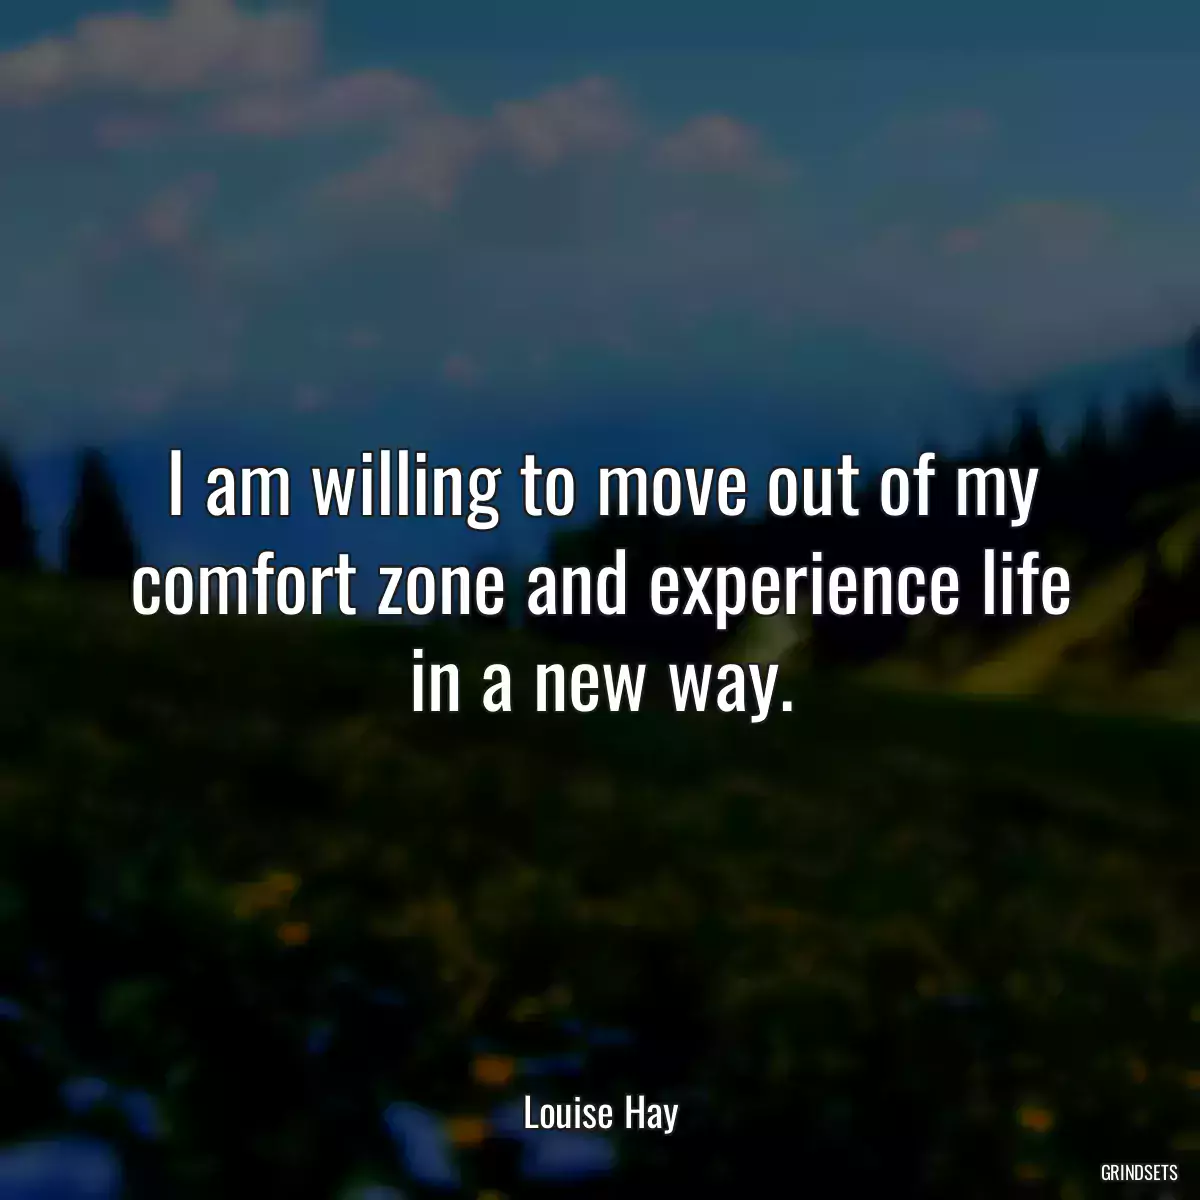 I am willing to move out of my comfort zone and experience life in a new way.